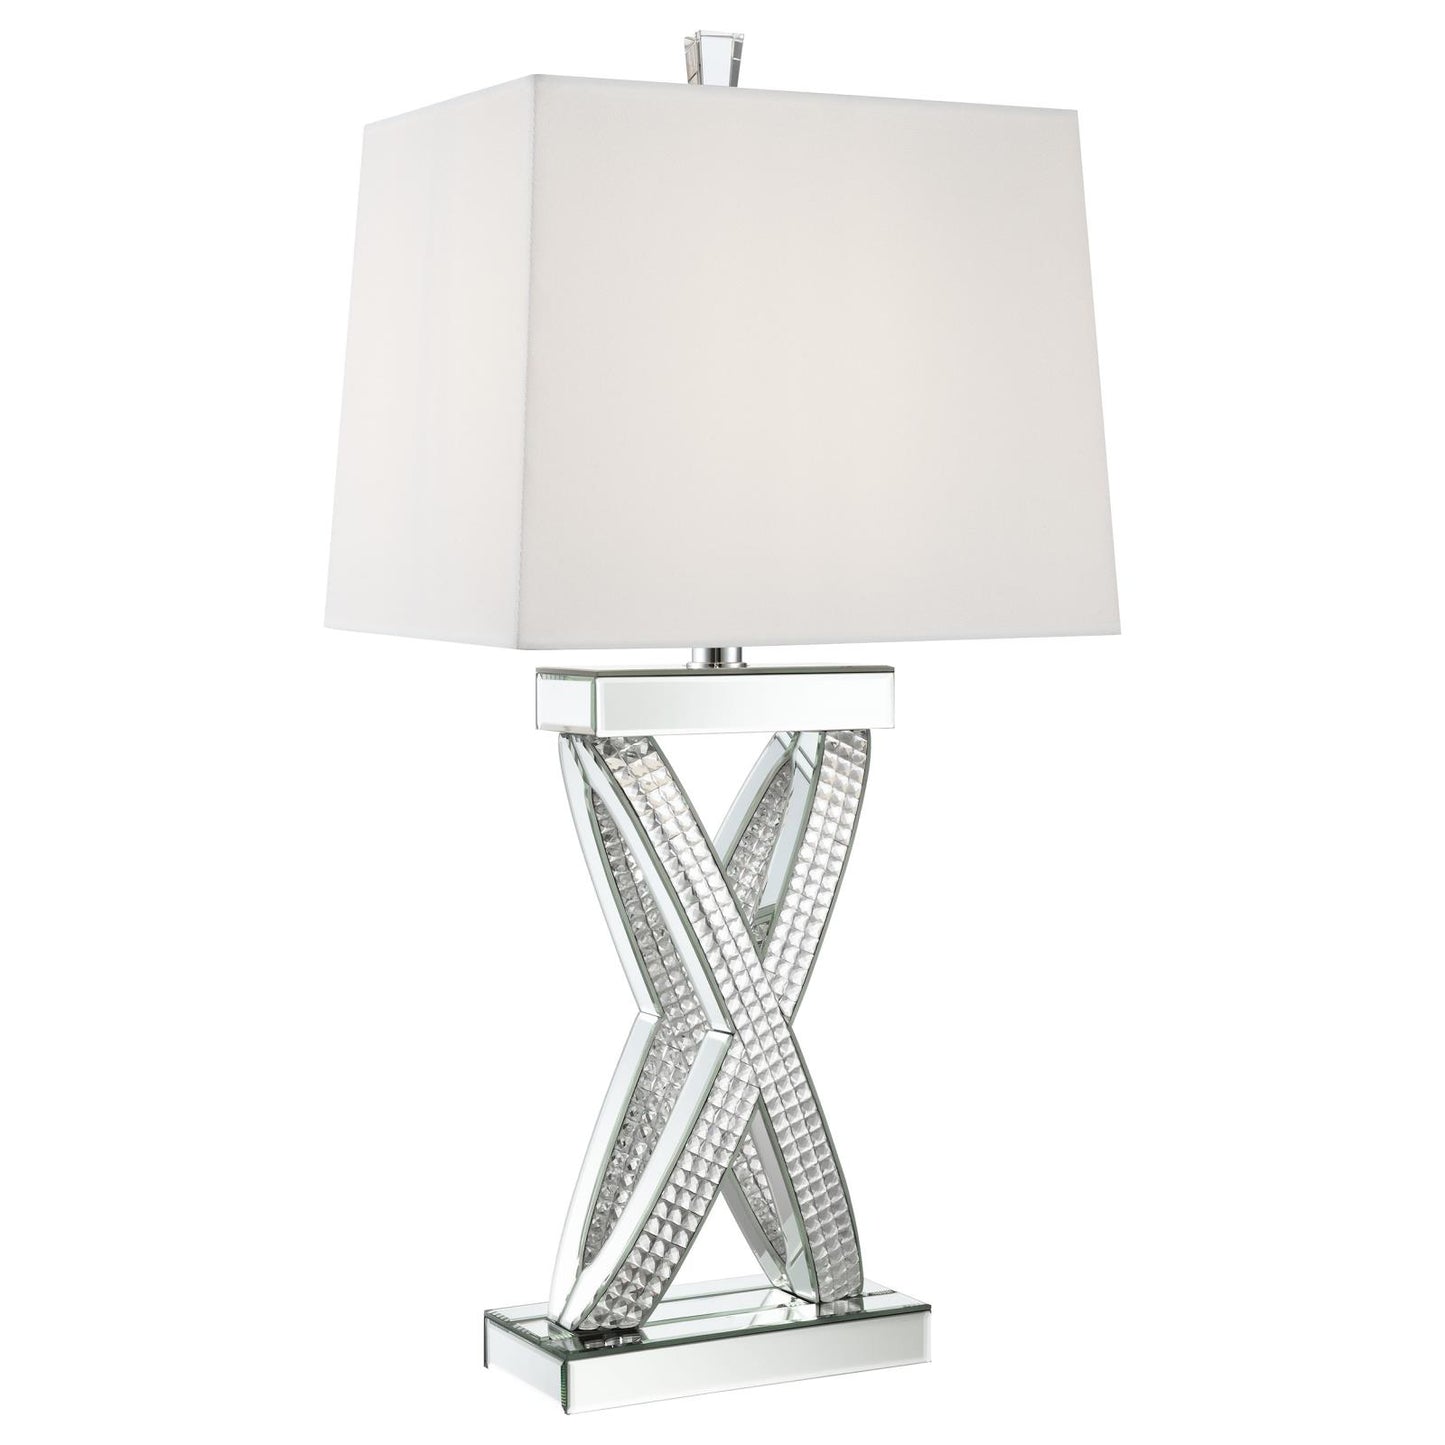 Dominick Table Lamp with Rectangle Shade White and Mirror